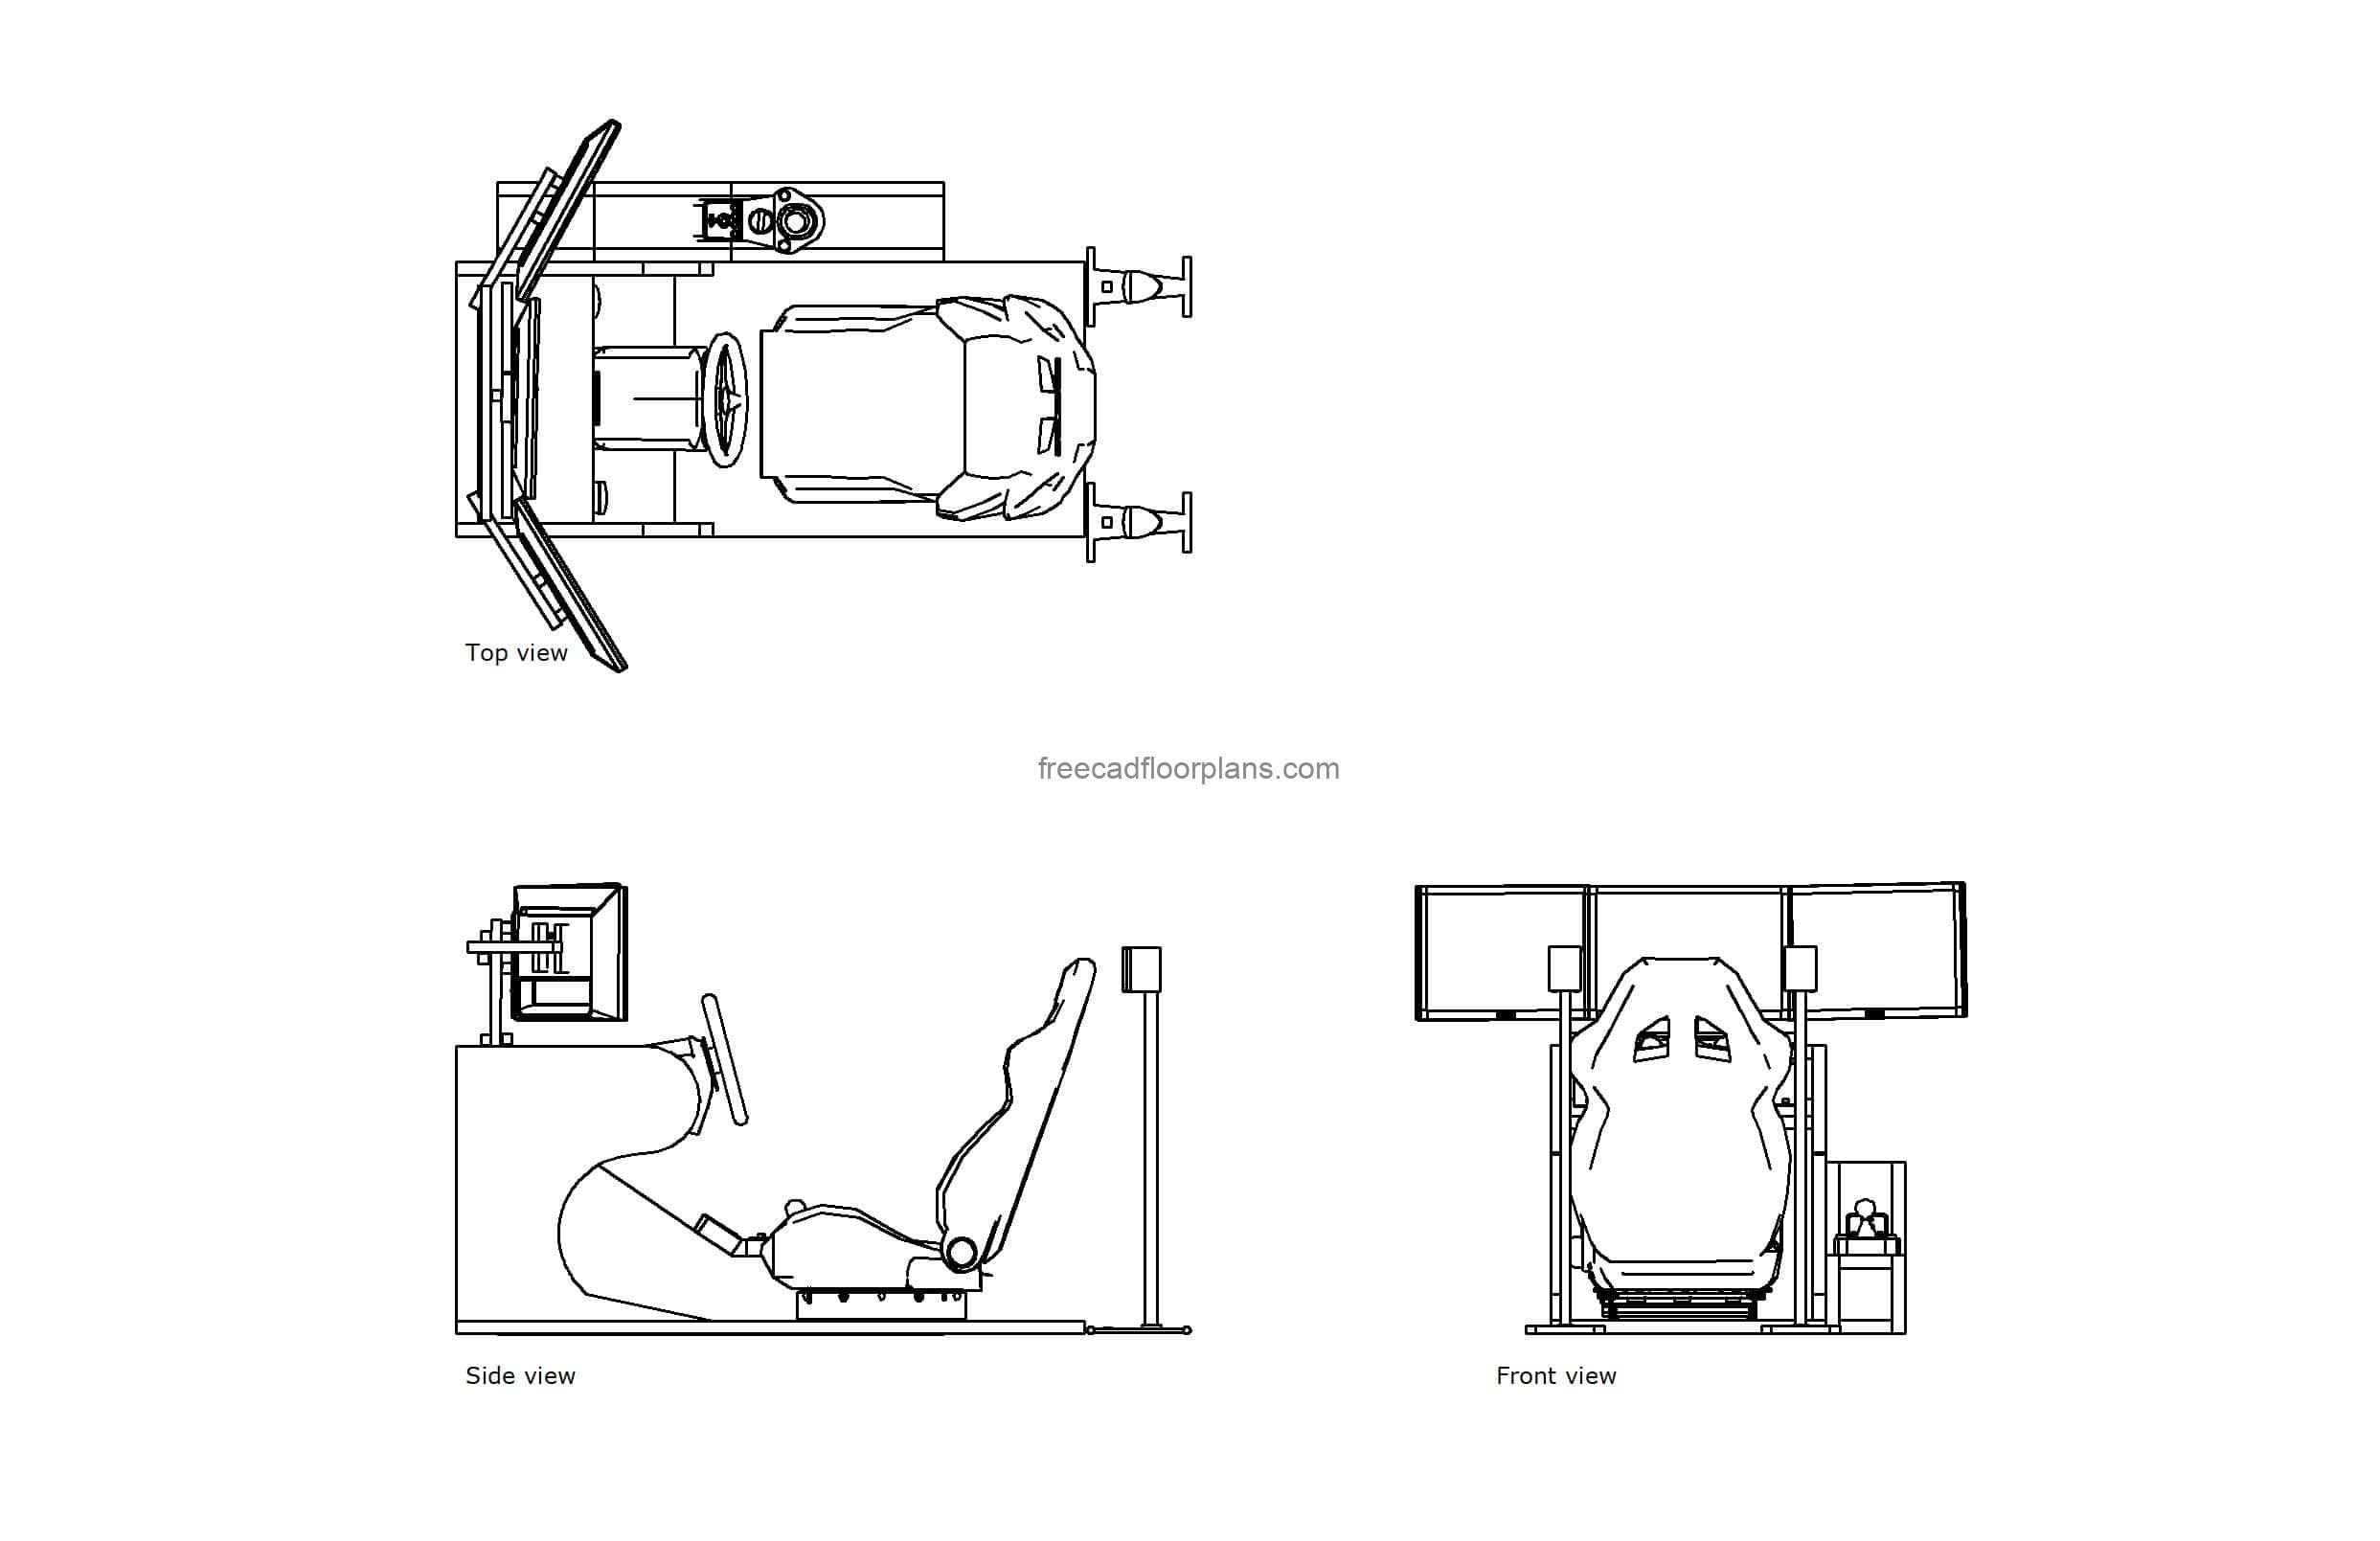 autocad drawing of a racing simulator gaming machine, plan and elevation 2d views, dwg file free for download